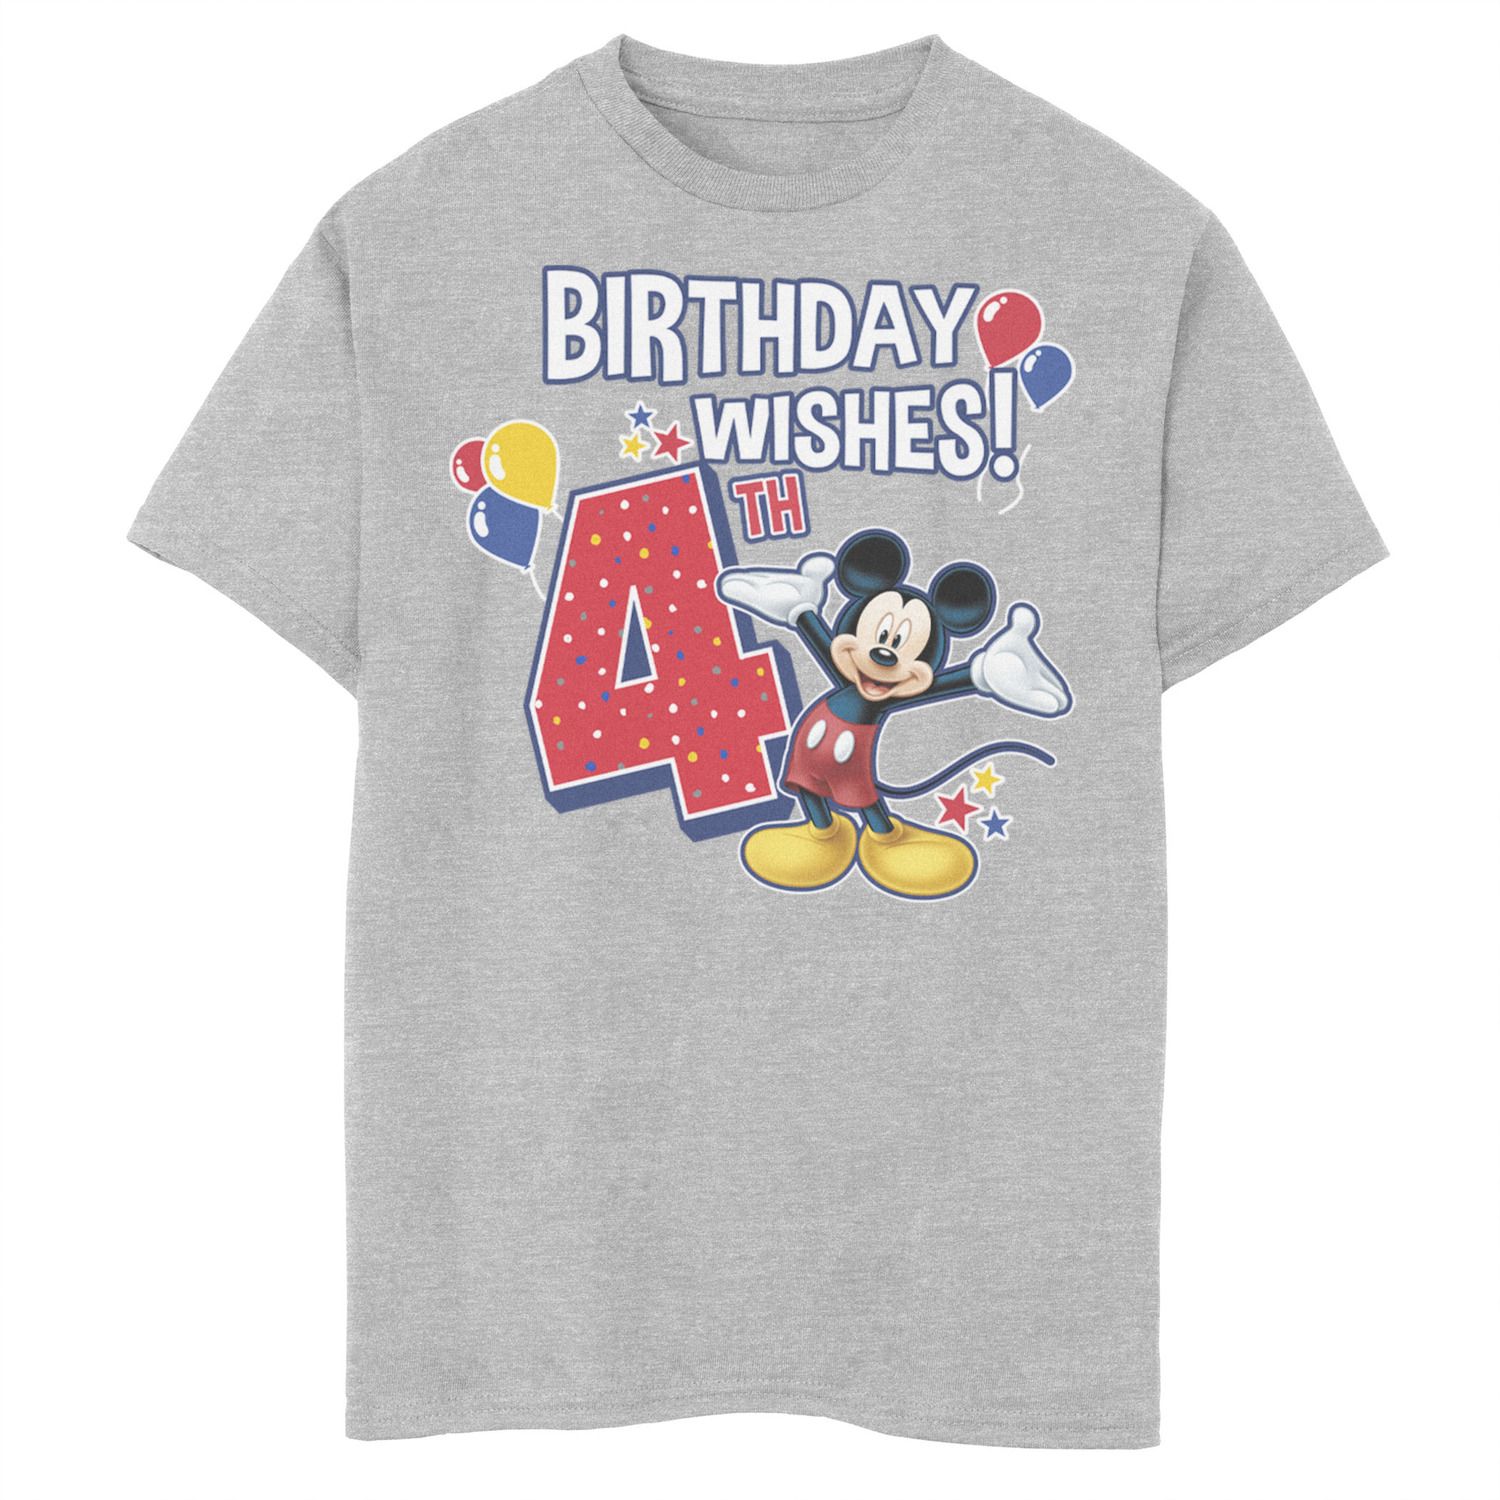 Image for Disney 's Mickey Mouse Boys 8-20 4th Birthday Wishes Portrait Tee at Kohl's.